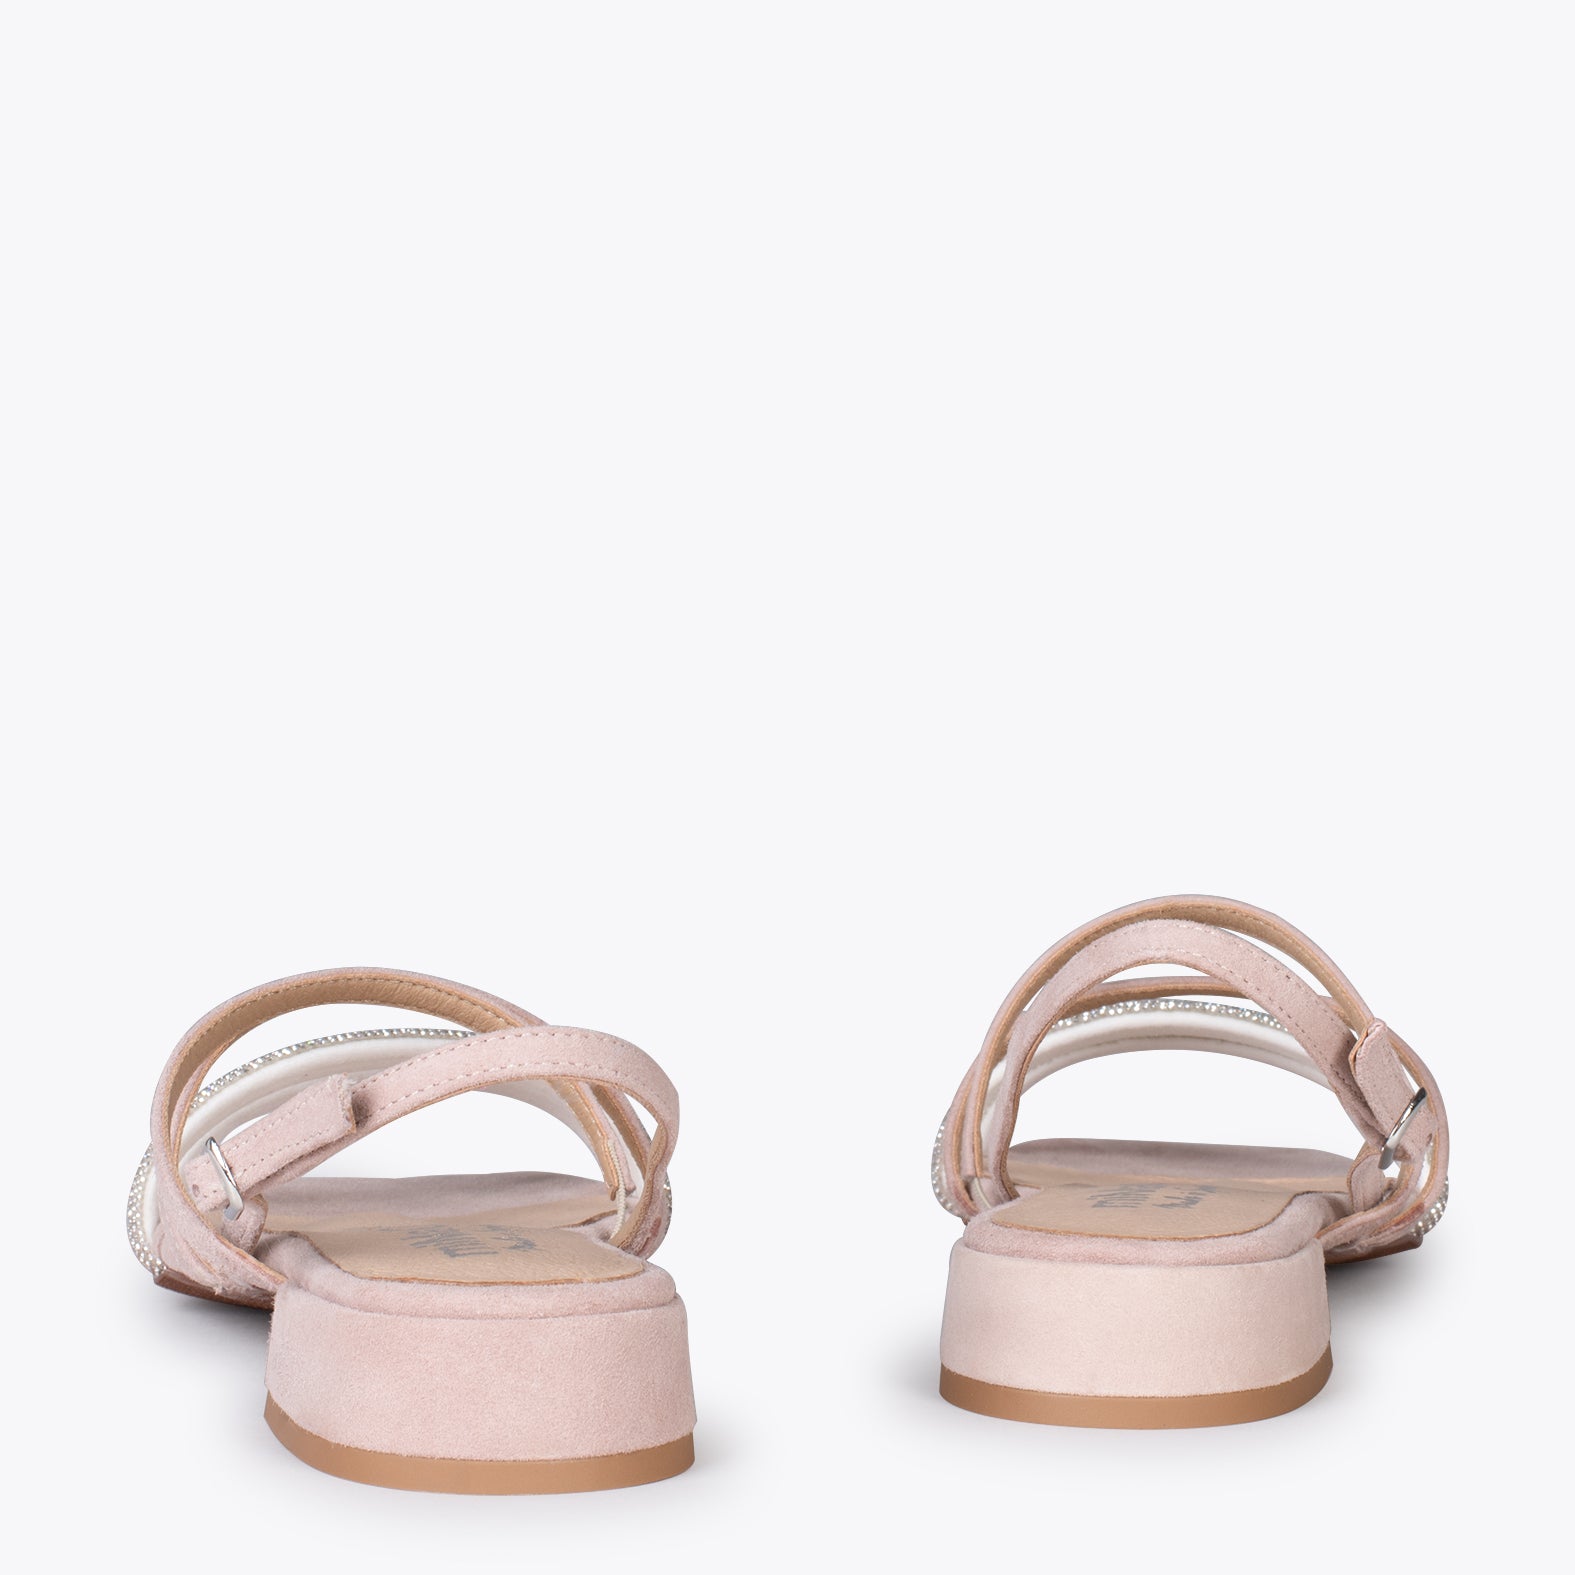 OSLO – NUDE flat sandals with shiny straps